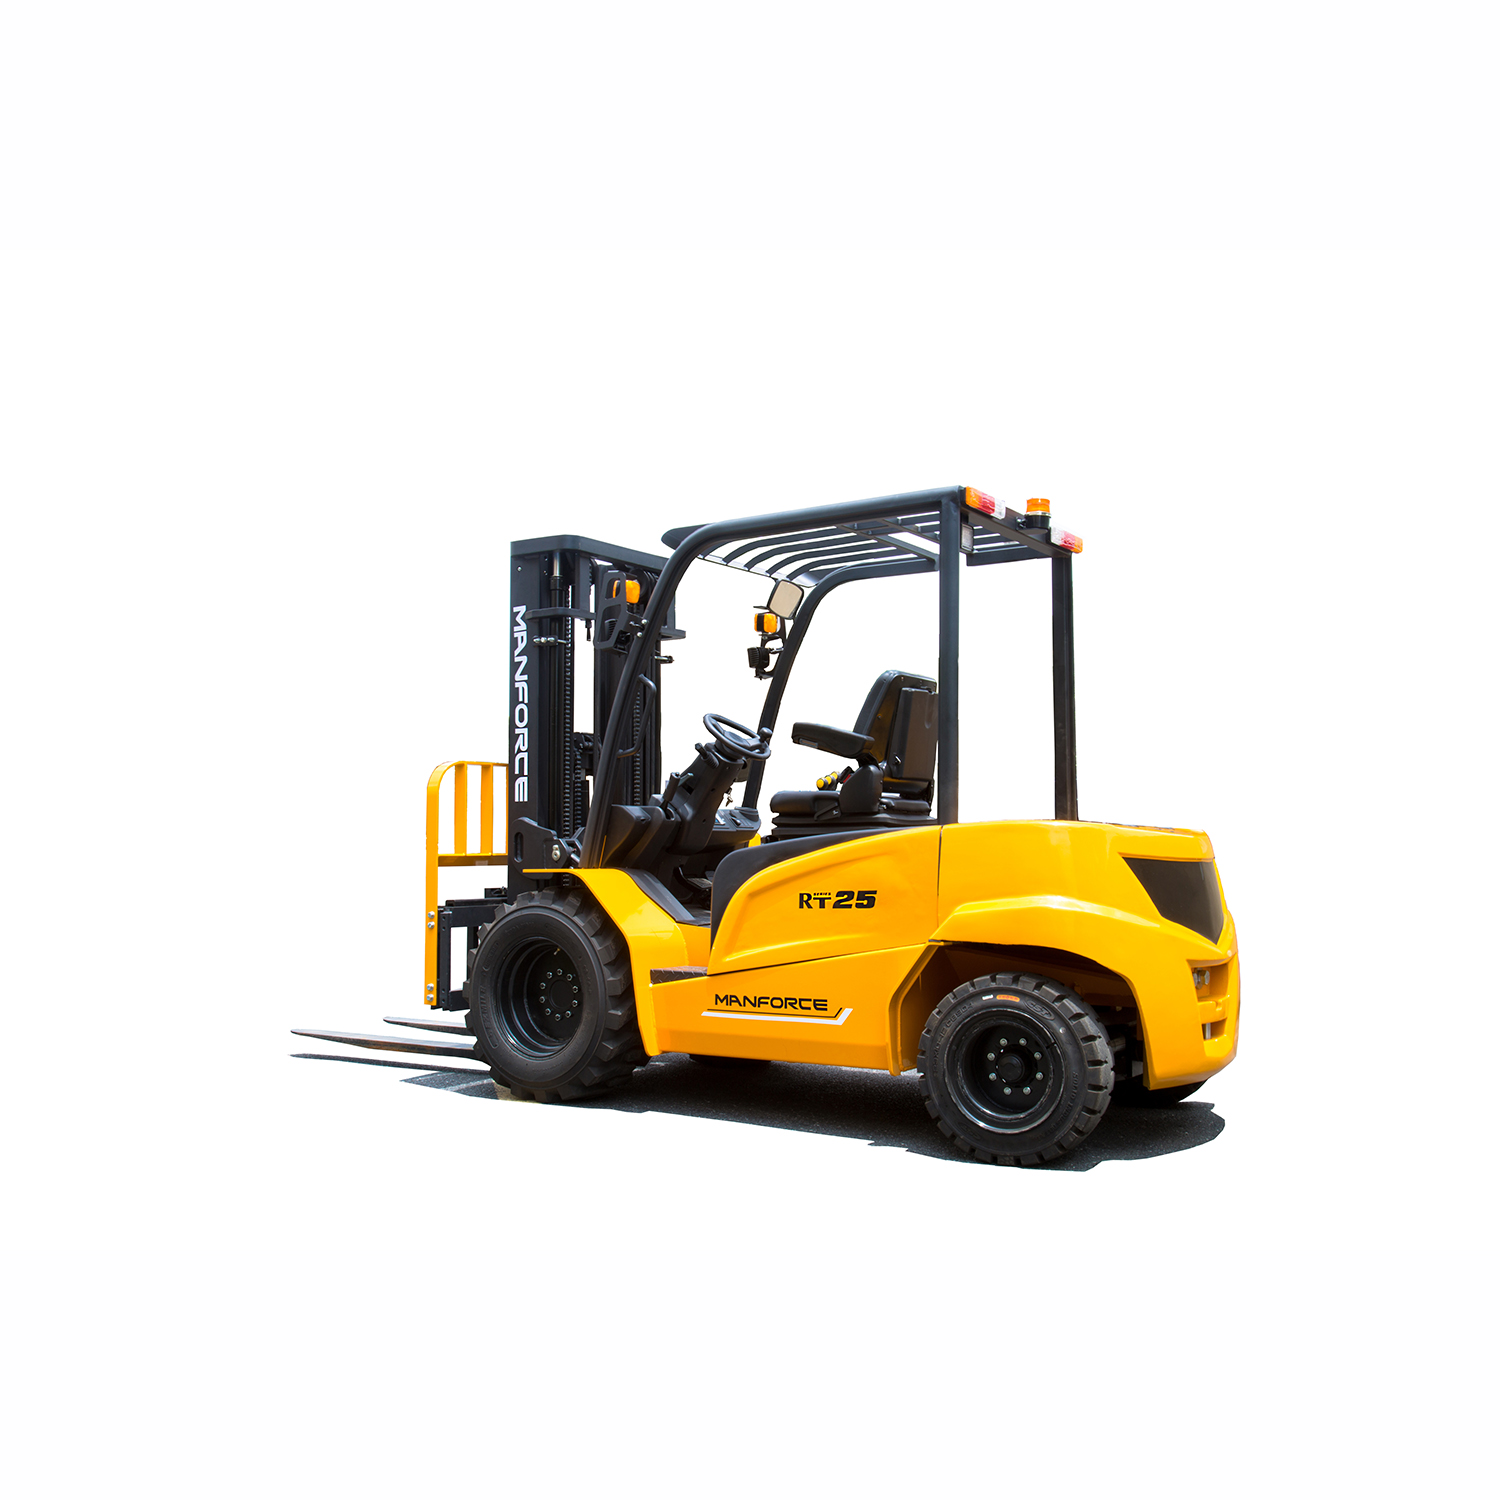 1.8-2.5T Electric Rough Terrain Forklift Featured Image